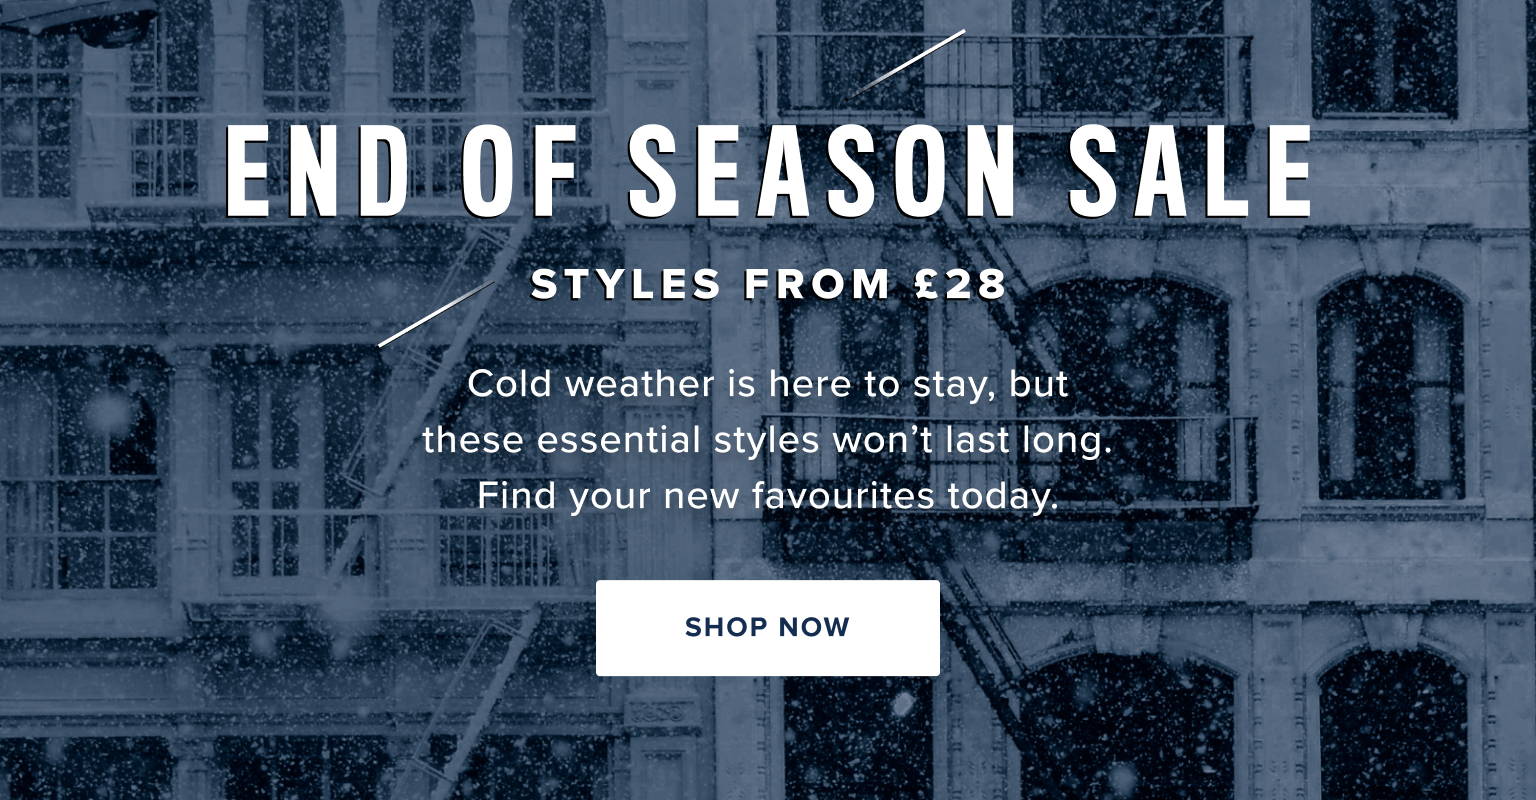 End of season sale. Styles from £28.